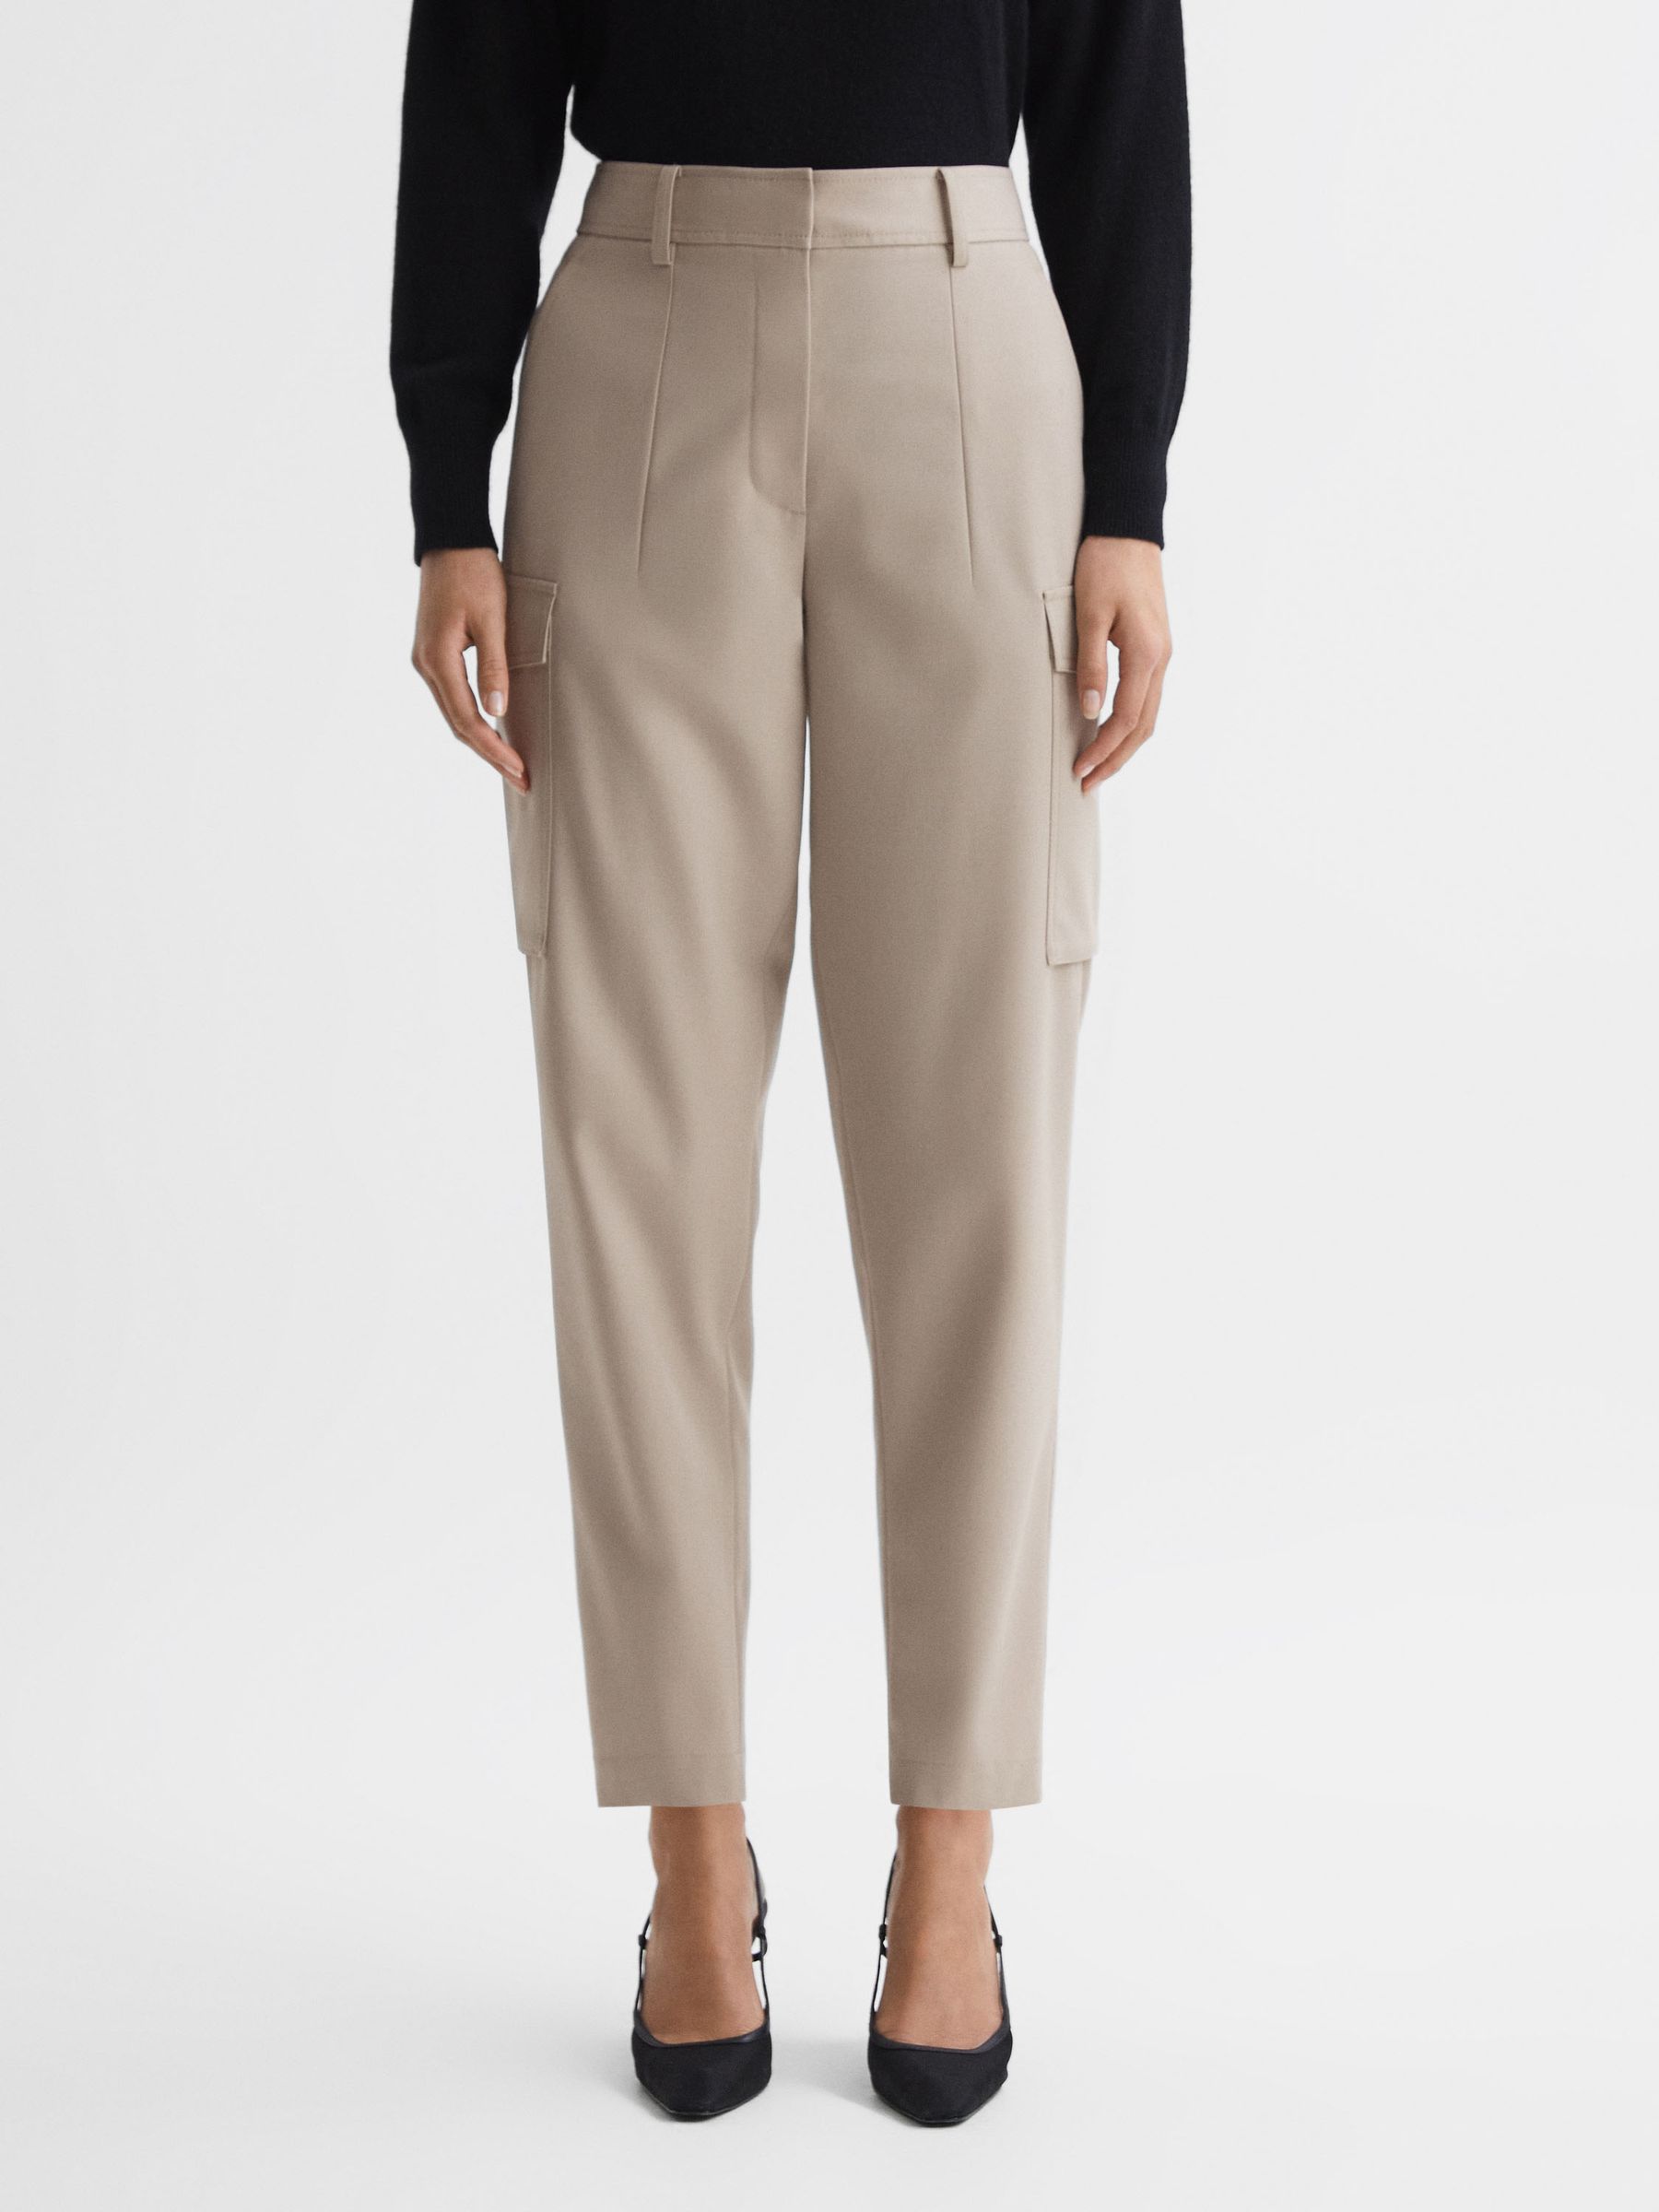 Reiss Violet Mid Rise Cargo Trousers | REISS USA